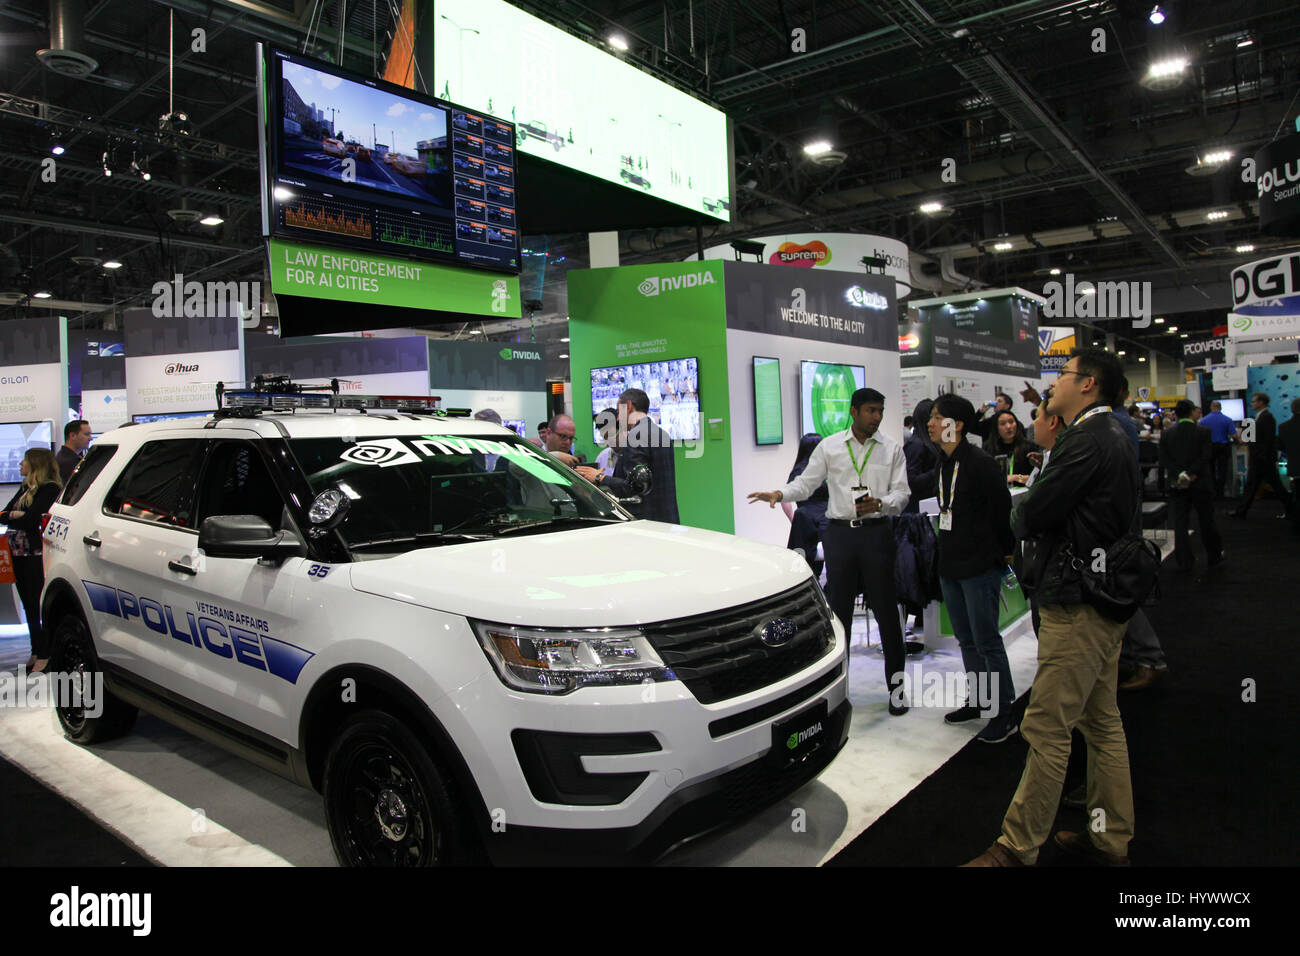 Las Vegas, USA. 6th Apr, 2017. People visit the International Security Conference & Exposition, also known as ISC West, in Las Vegas, the United States, April 6, 2017. Credit: Gao Shan/Xinhua/Alamy Live News Stock Photo